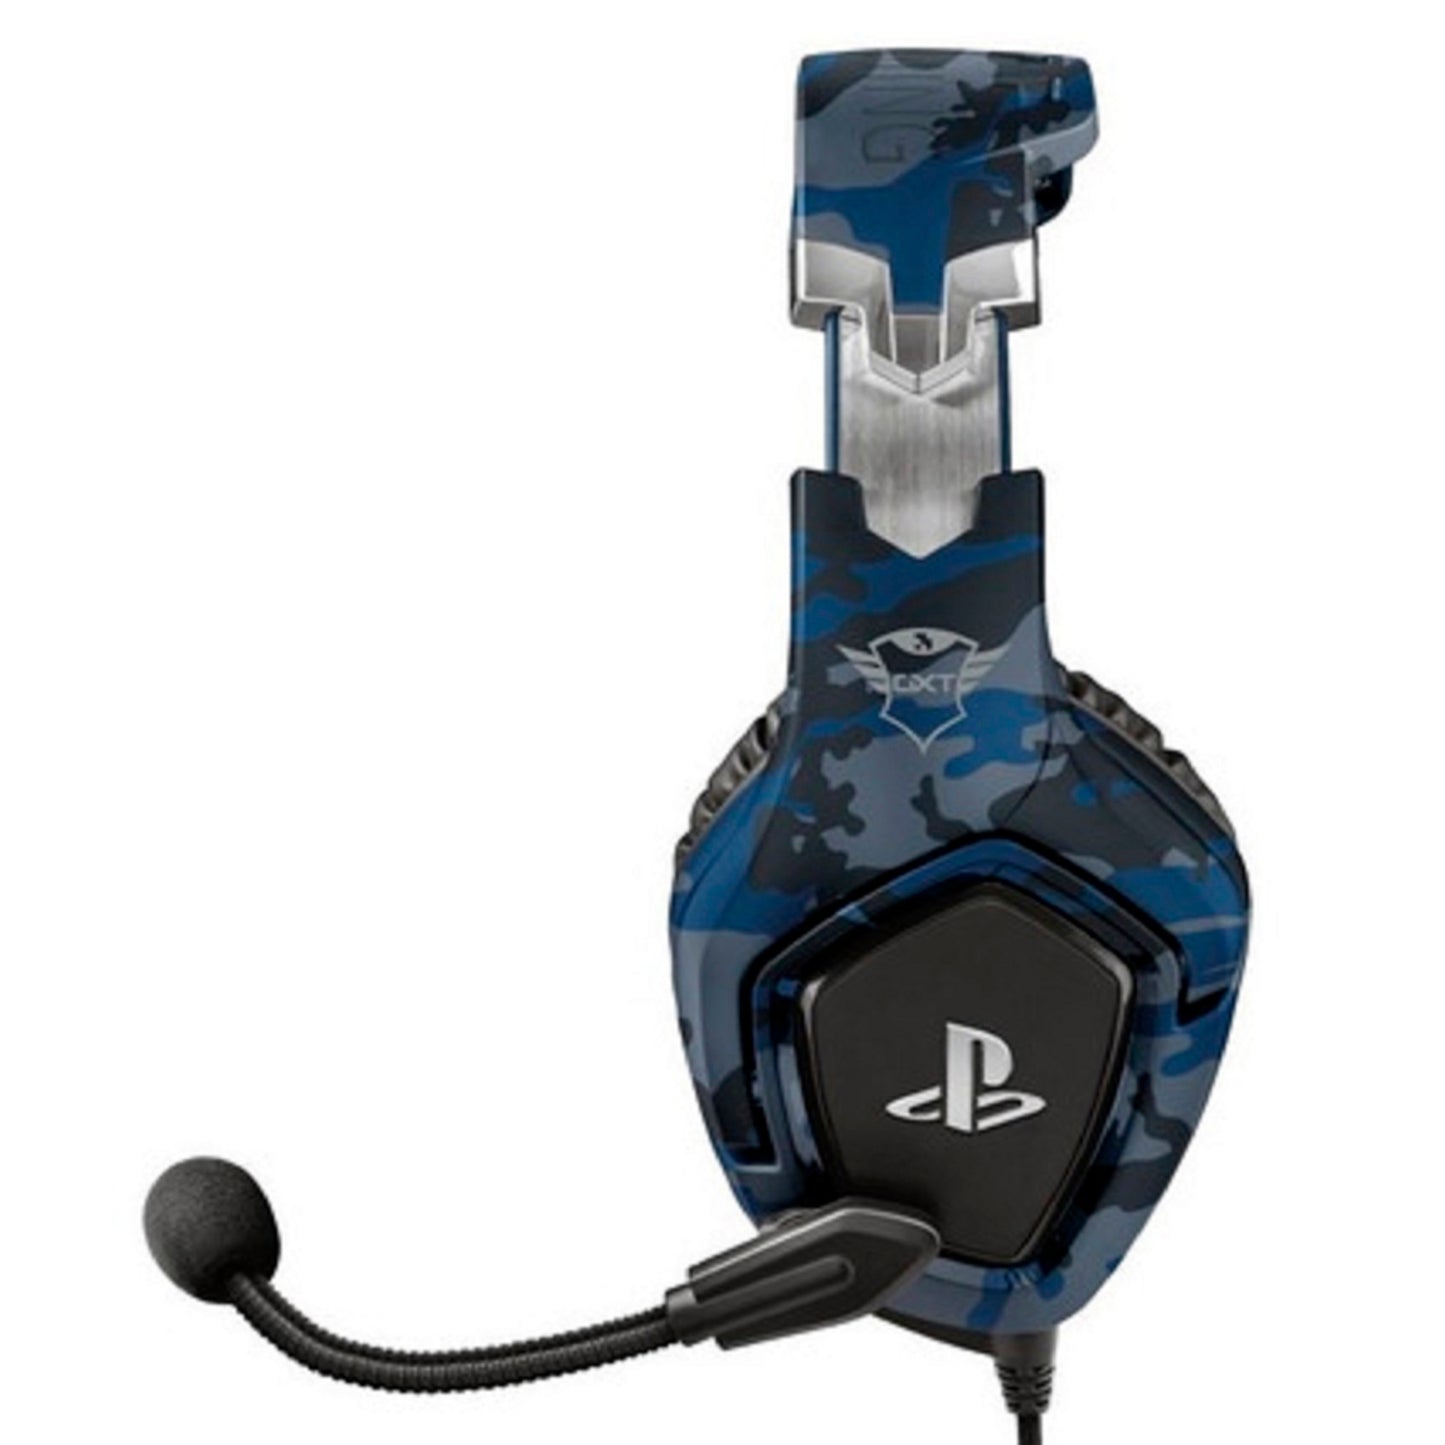 Audifono Gamer Trust Forze Gxt 488 Azul- Oficial Playstation